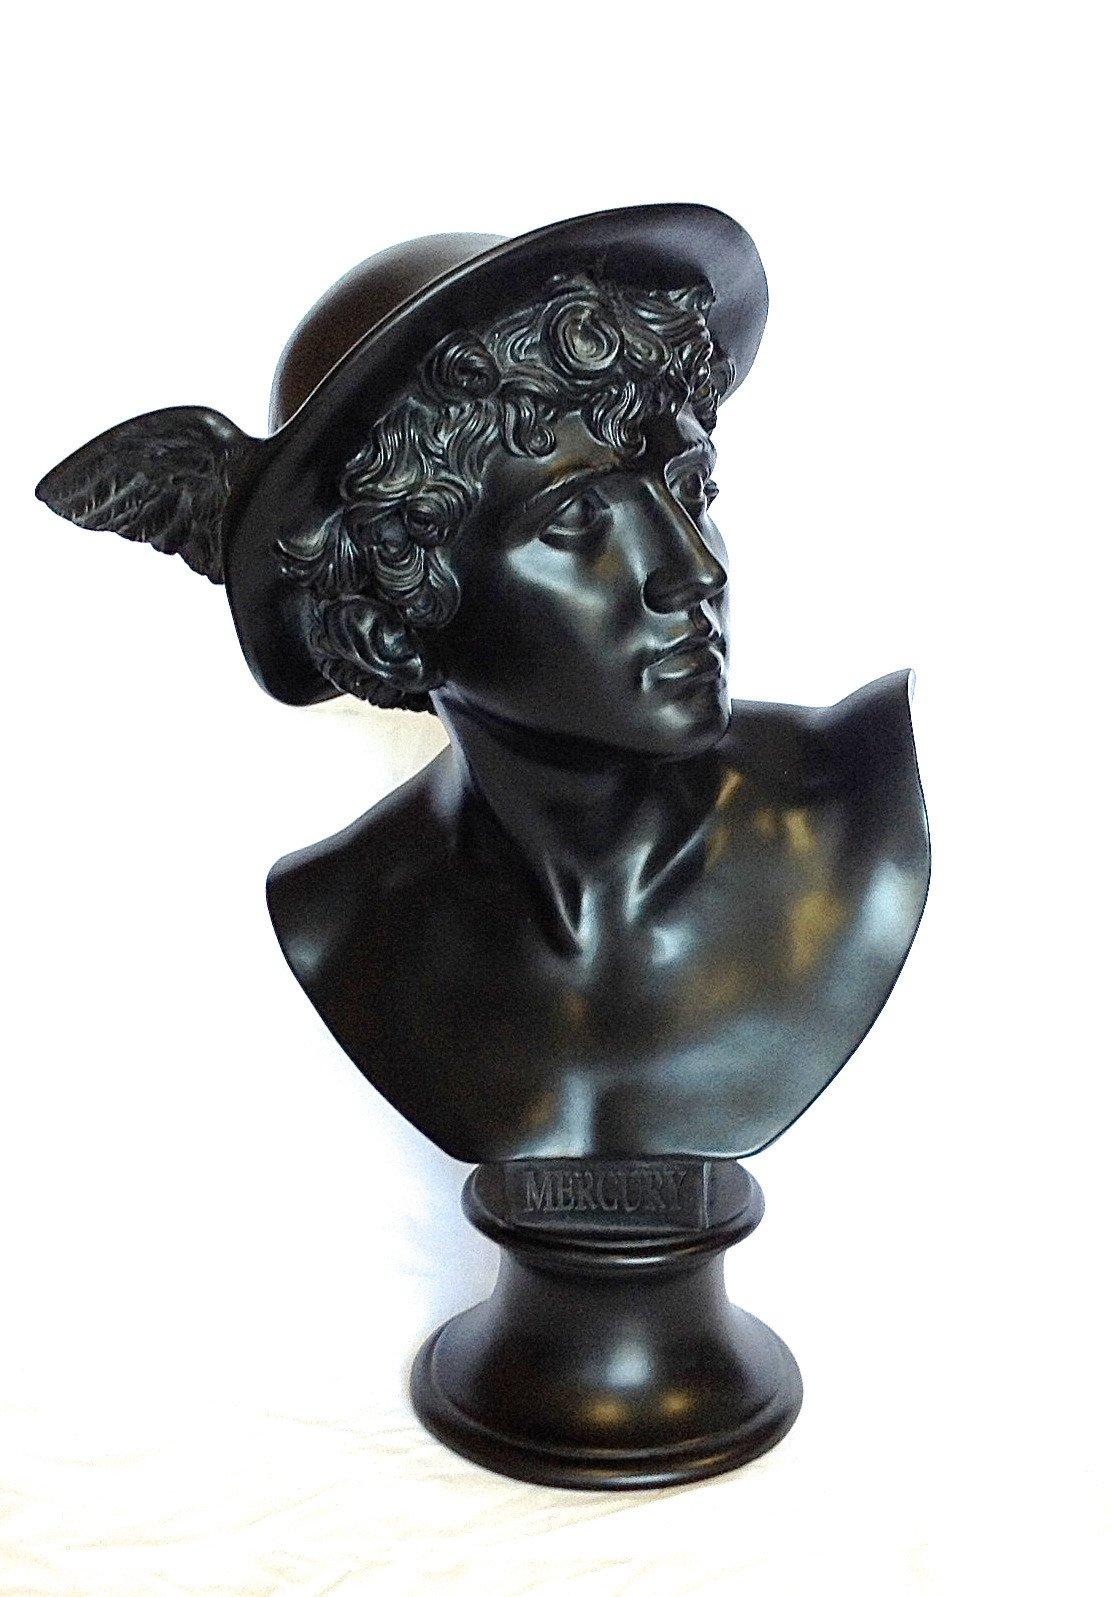 A stunning mercury black marble bust sculpture, 20th century.
Mercury, a bust, after Canova.
A fine Italian neoclassical marble bust of mercury, wearing helmet decorated with his customary wings, finished in basalt black.